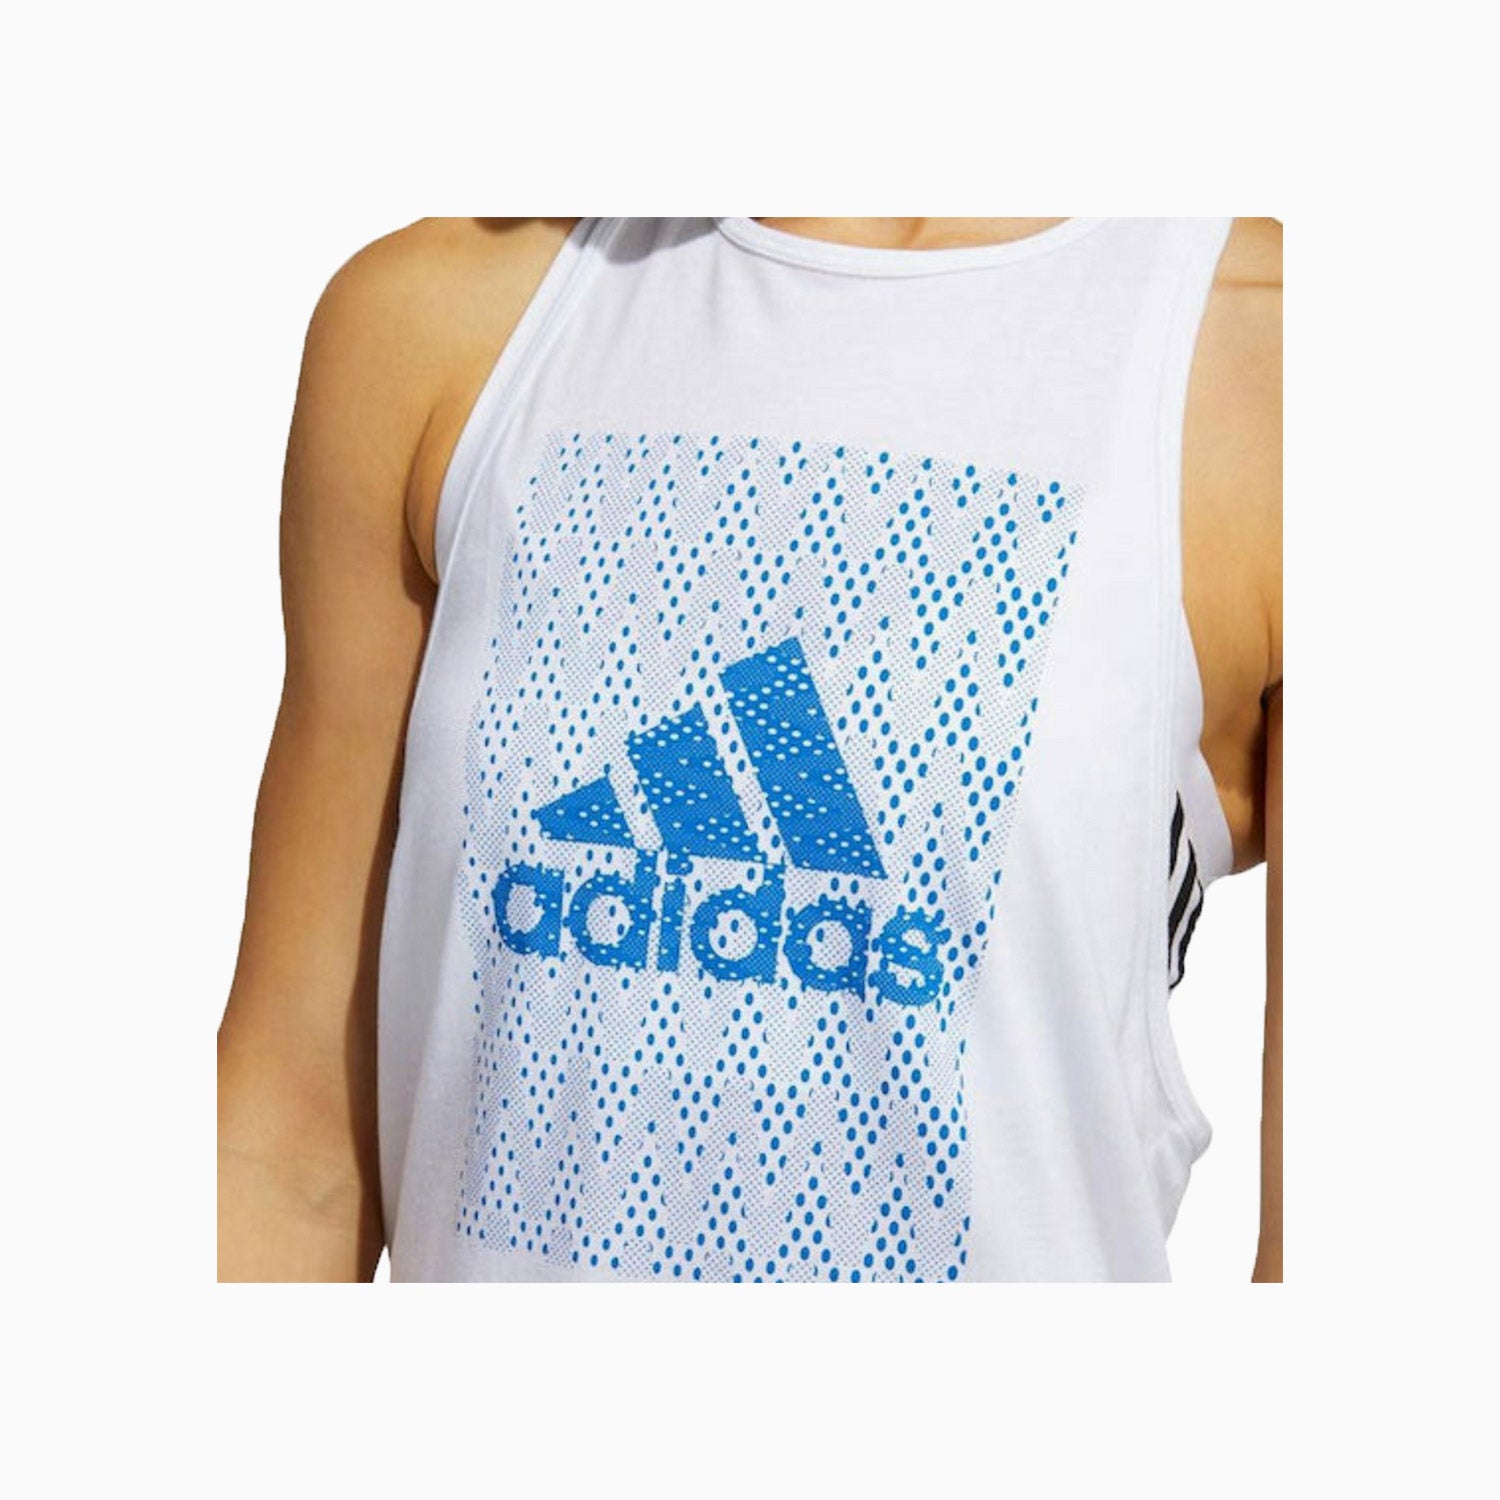 adidas-womens-badge-of-sport-graphic-sleeveless-sports-top-fq2326